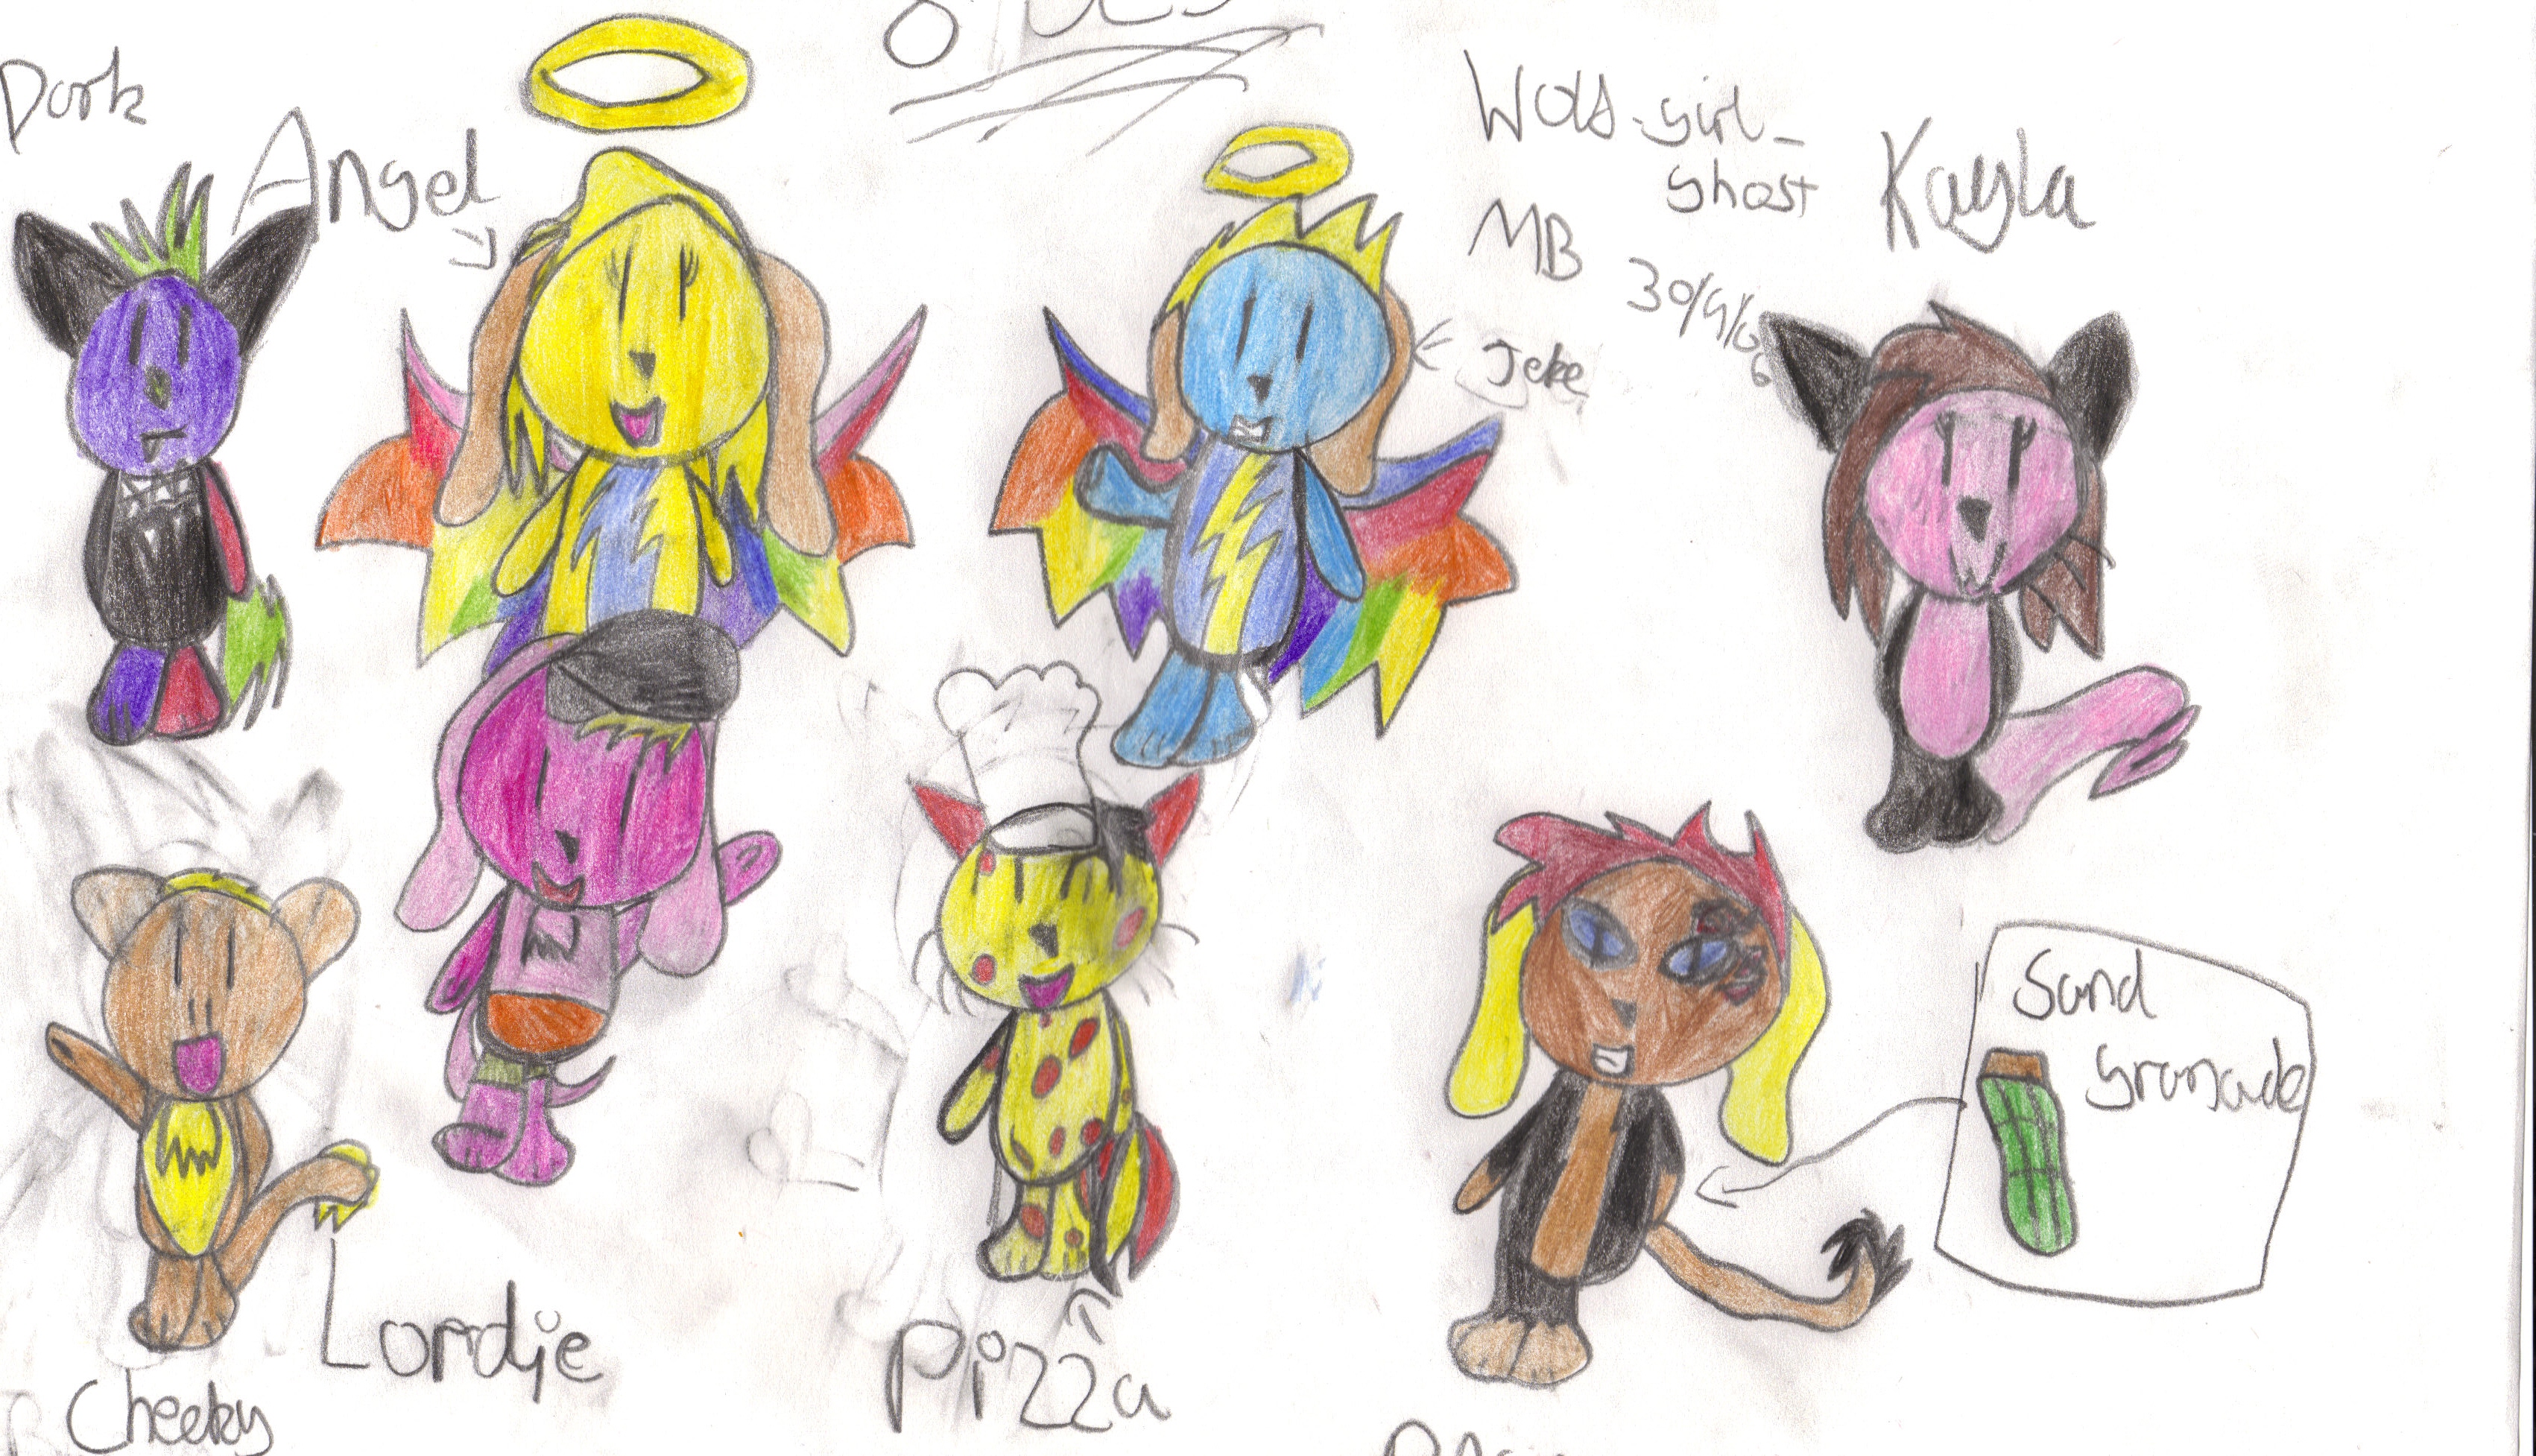 ZOMG 8 NEW HTF OCS by wolf-girl-ghost